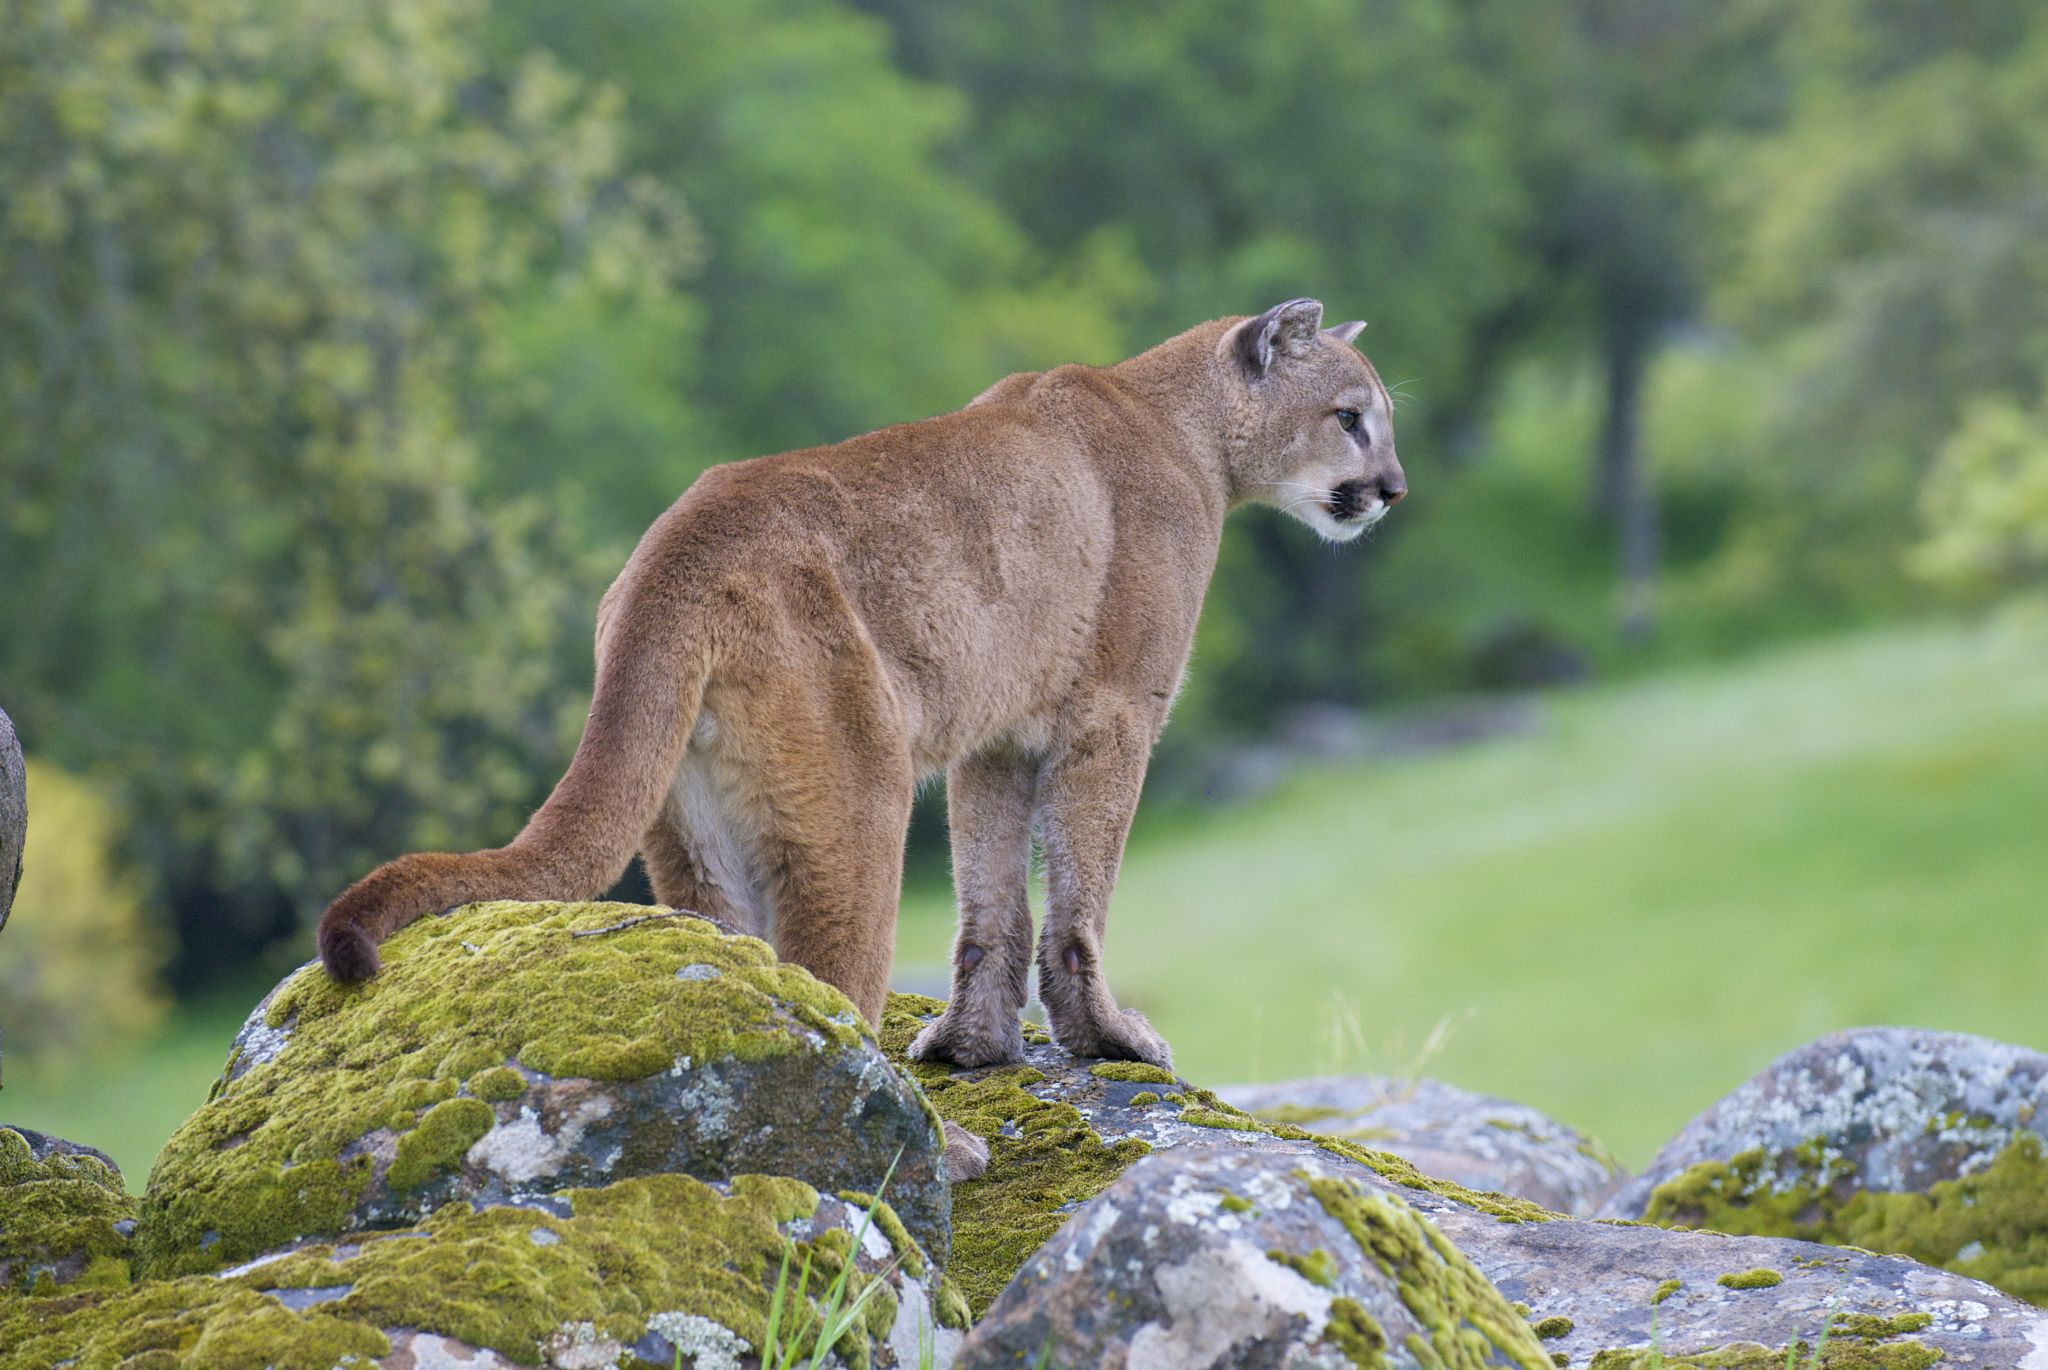 Woodside resident drives on lawn to prevent mountain lion attack